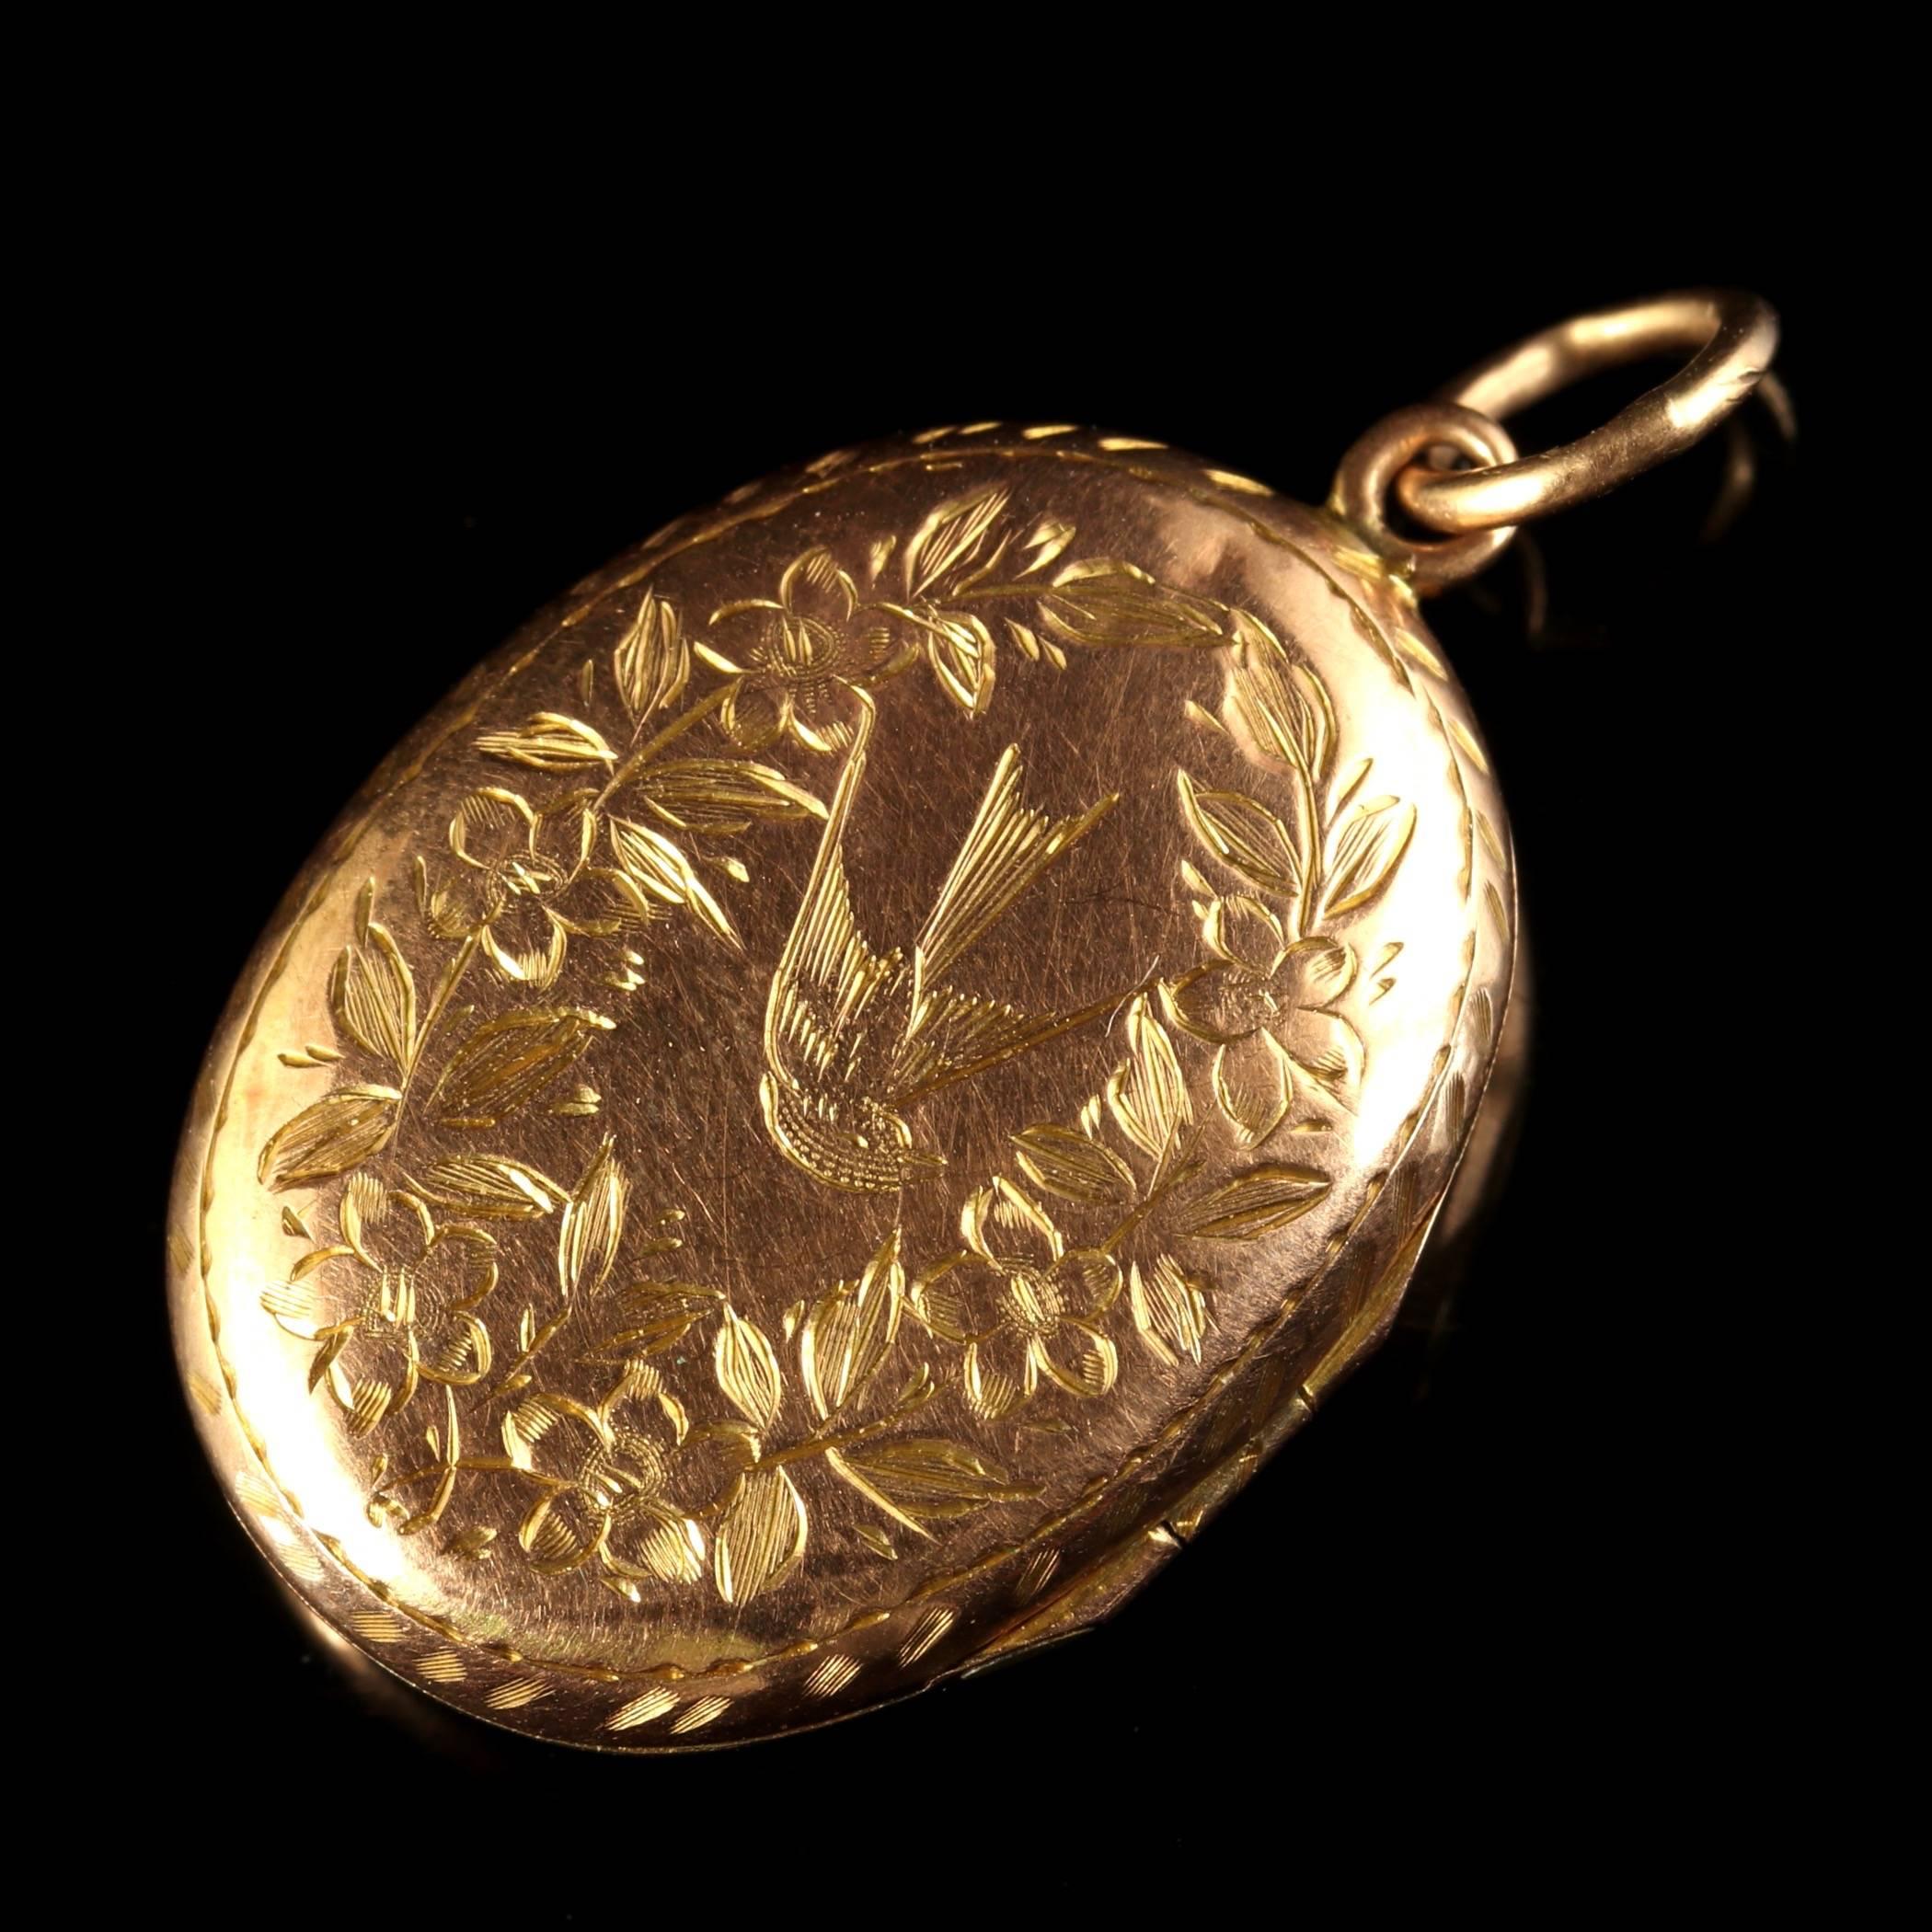 This fabulous antique 9ct Rose Gold locket is genuine Edwardian dated Chester 1911.

The front of the locket is beautifully engraved with birds on the front displaying beautiful Edwardian workmanship. 

All set in 9ct Rose Gold and complete with